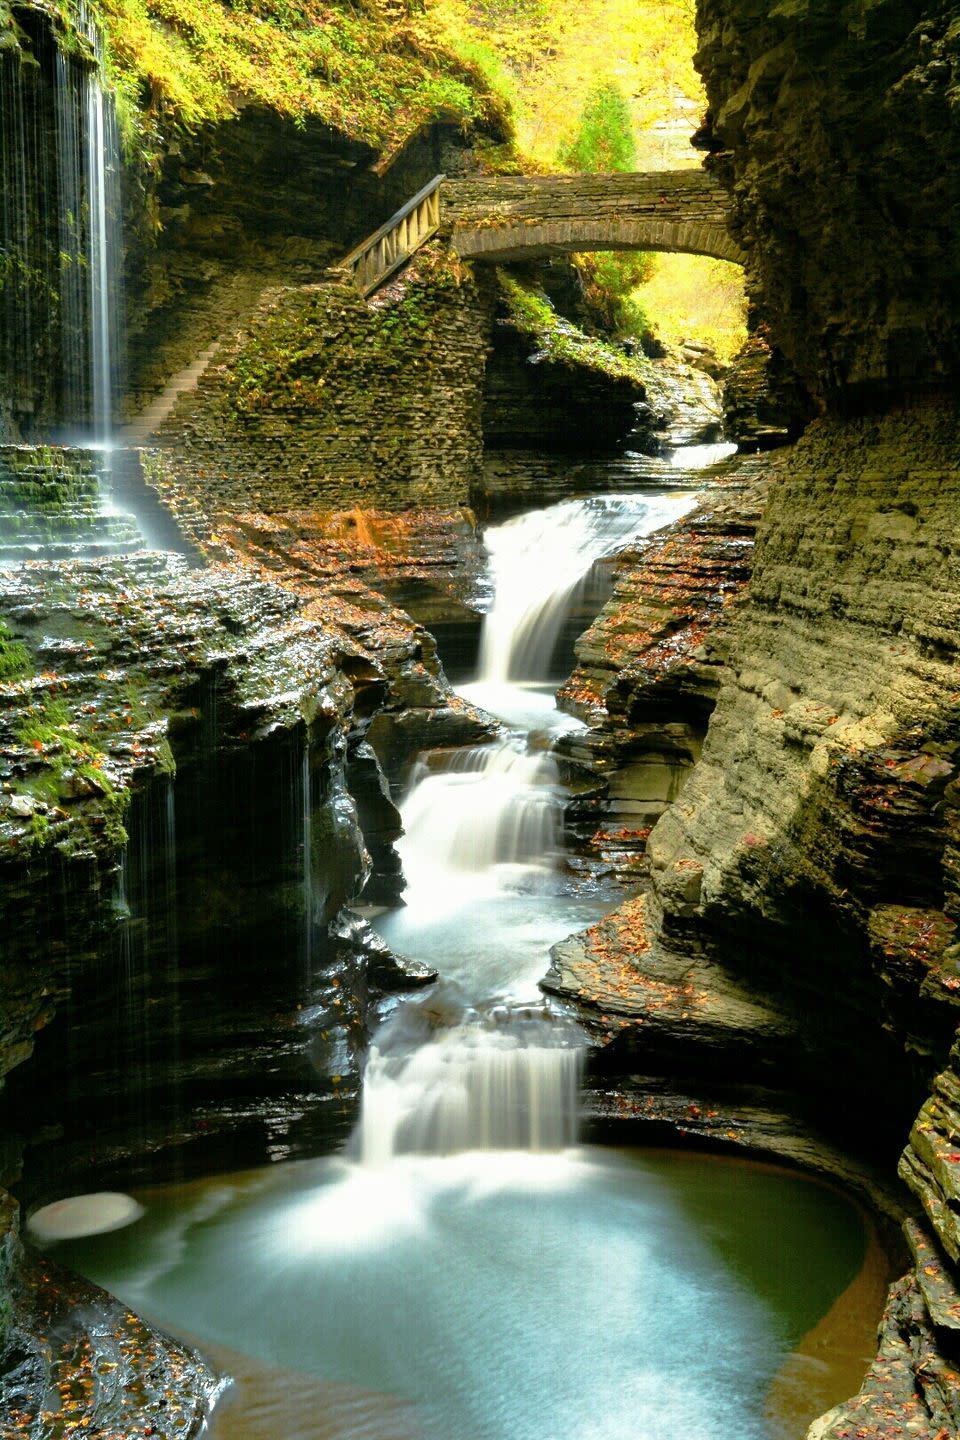 <p><strong>Where: </strong>Watkins Glen, New York</p><p><strong>Why We Love It: </strong>Located in New York's Finger Lakes Region, this narrow gorge features 19 waterfalls within the space of just two miles.</p>